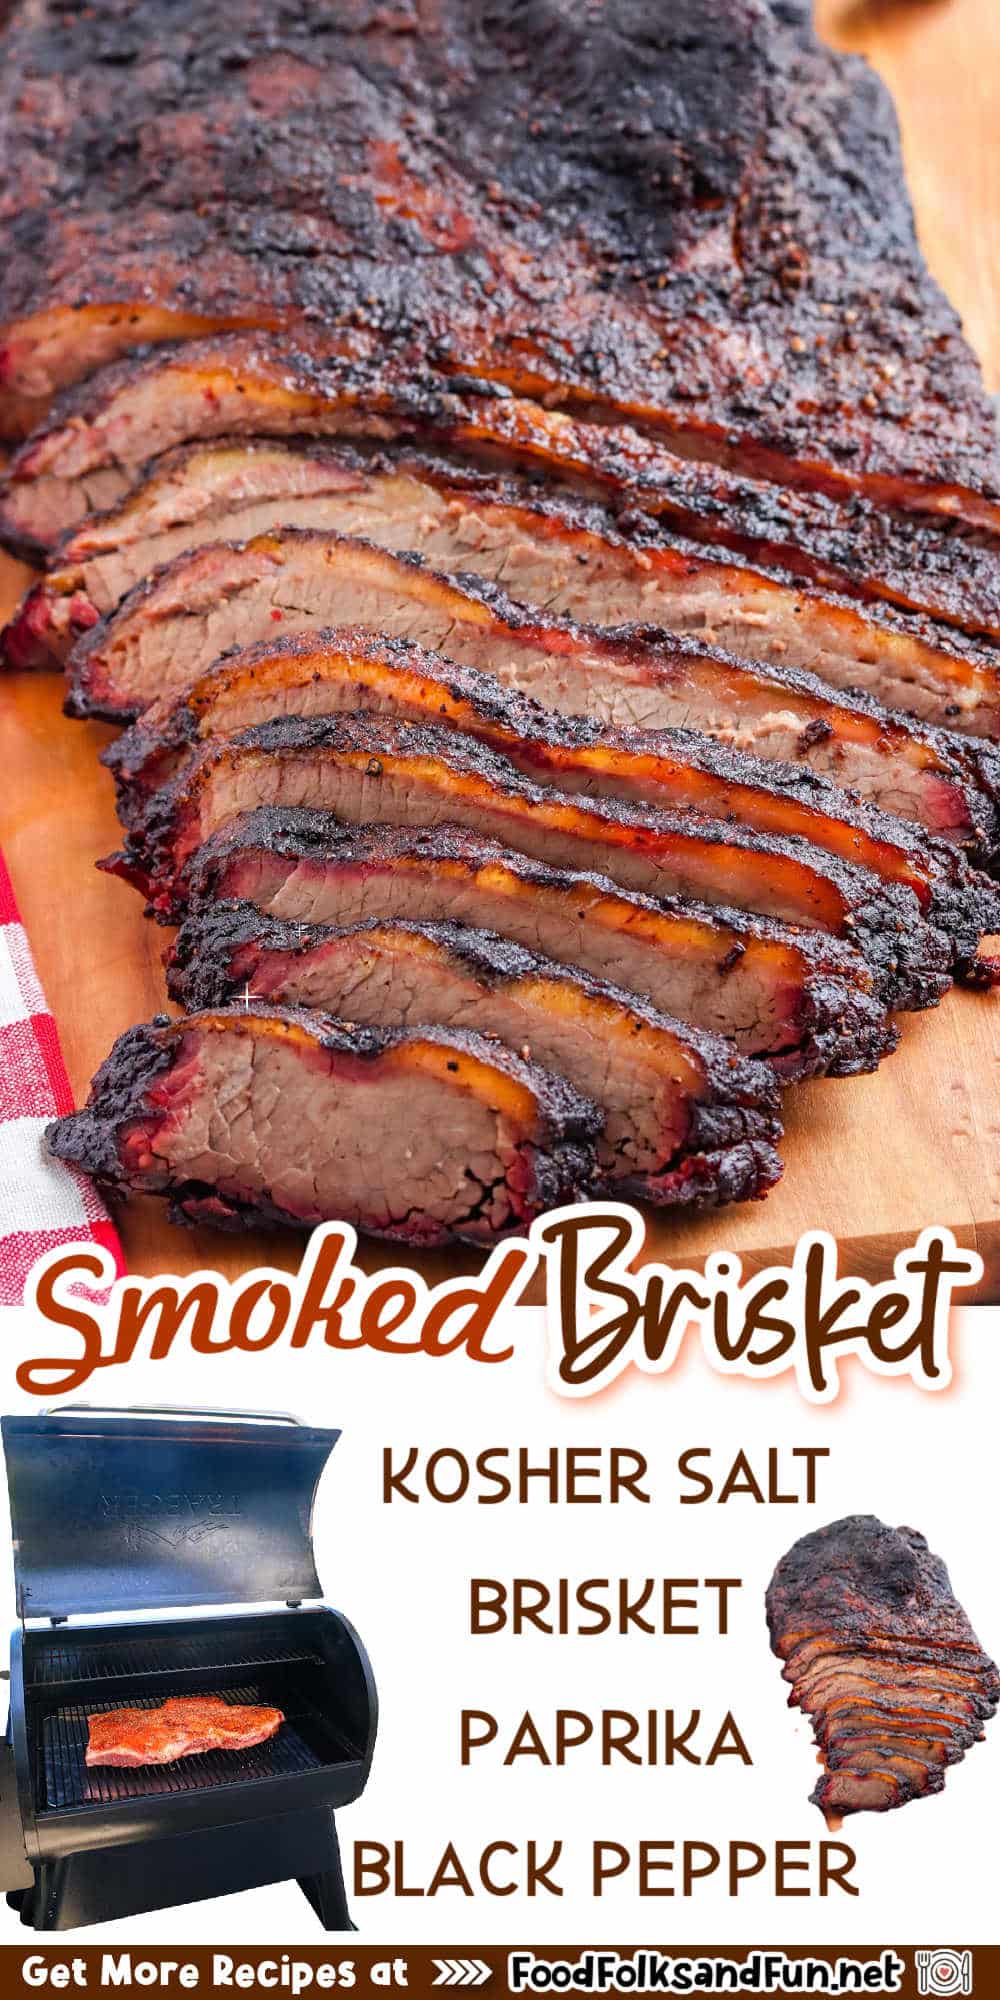 Juicy, succulent, and packed full of flavor, this Smoked Brisket recipe is perfect for holidays, outdoor get-togethers, and picnics. via @foodfolksandfun